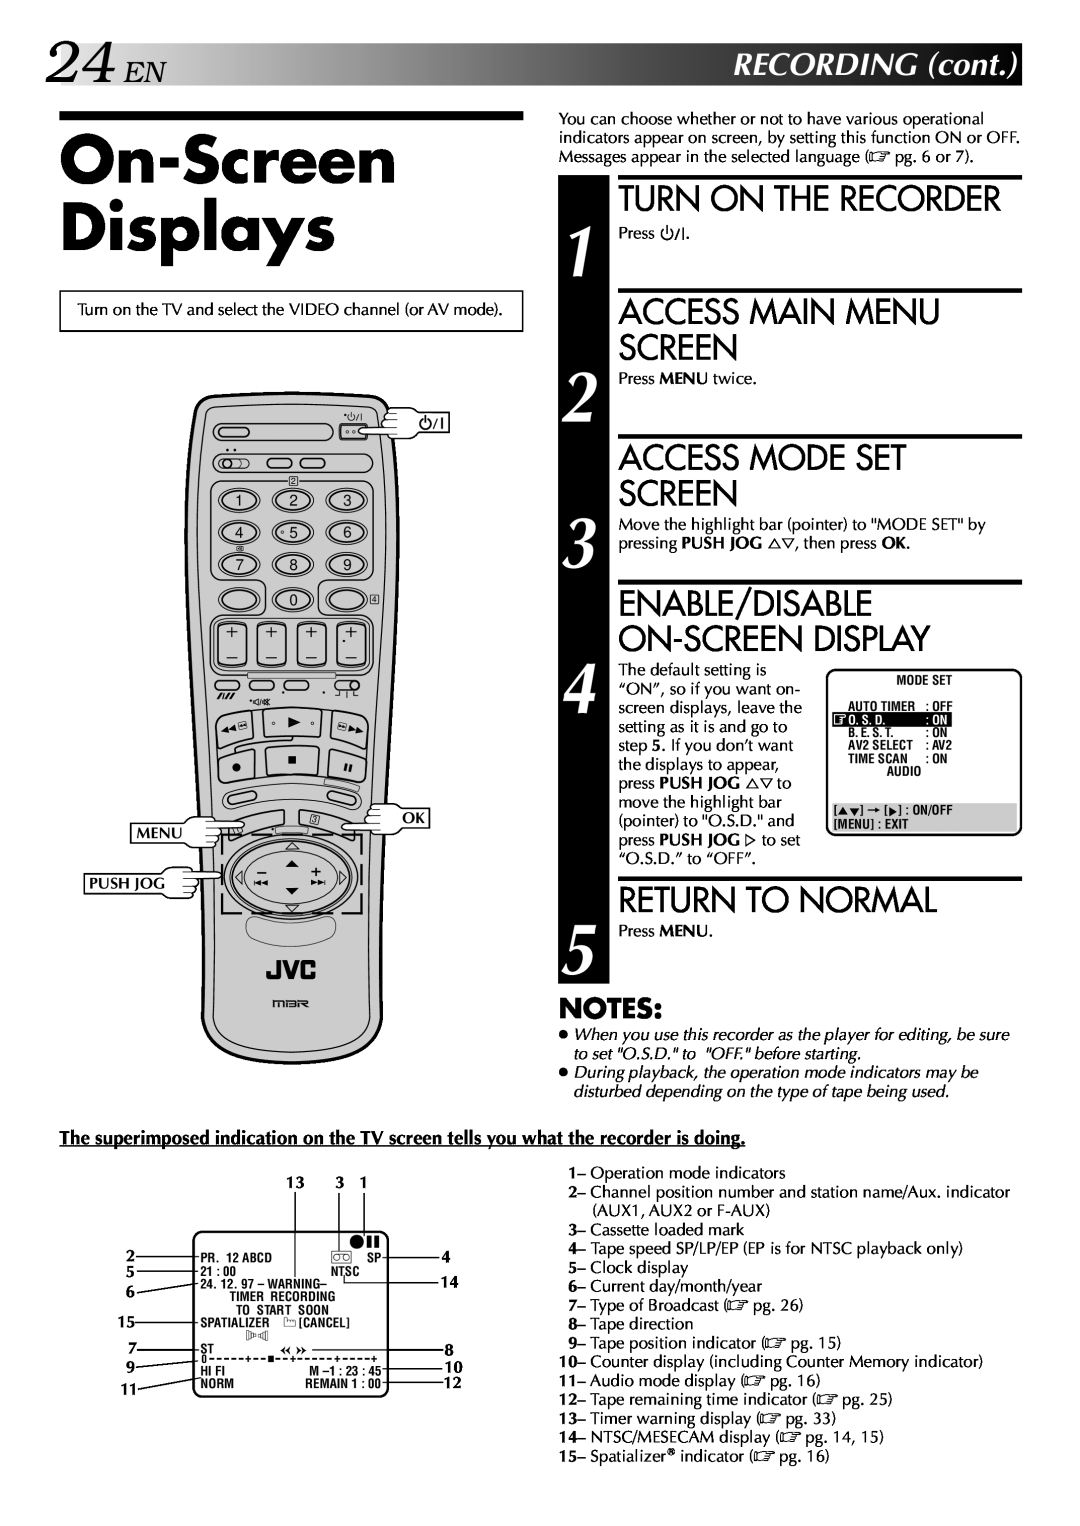 JVC HR-DD848E On-Screen Displays, Enable/Disable, 24ENRECORDINGcont, Turn On The Recorder, Access Main Menu, 13 3 